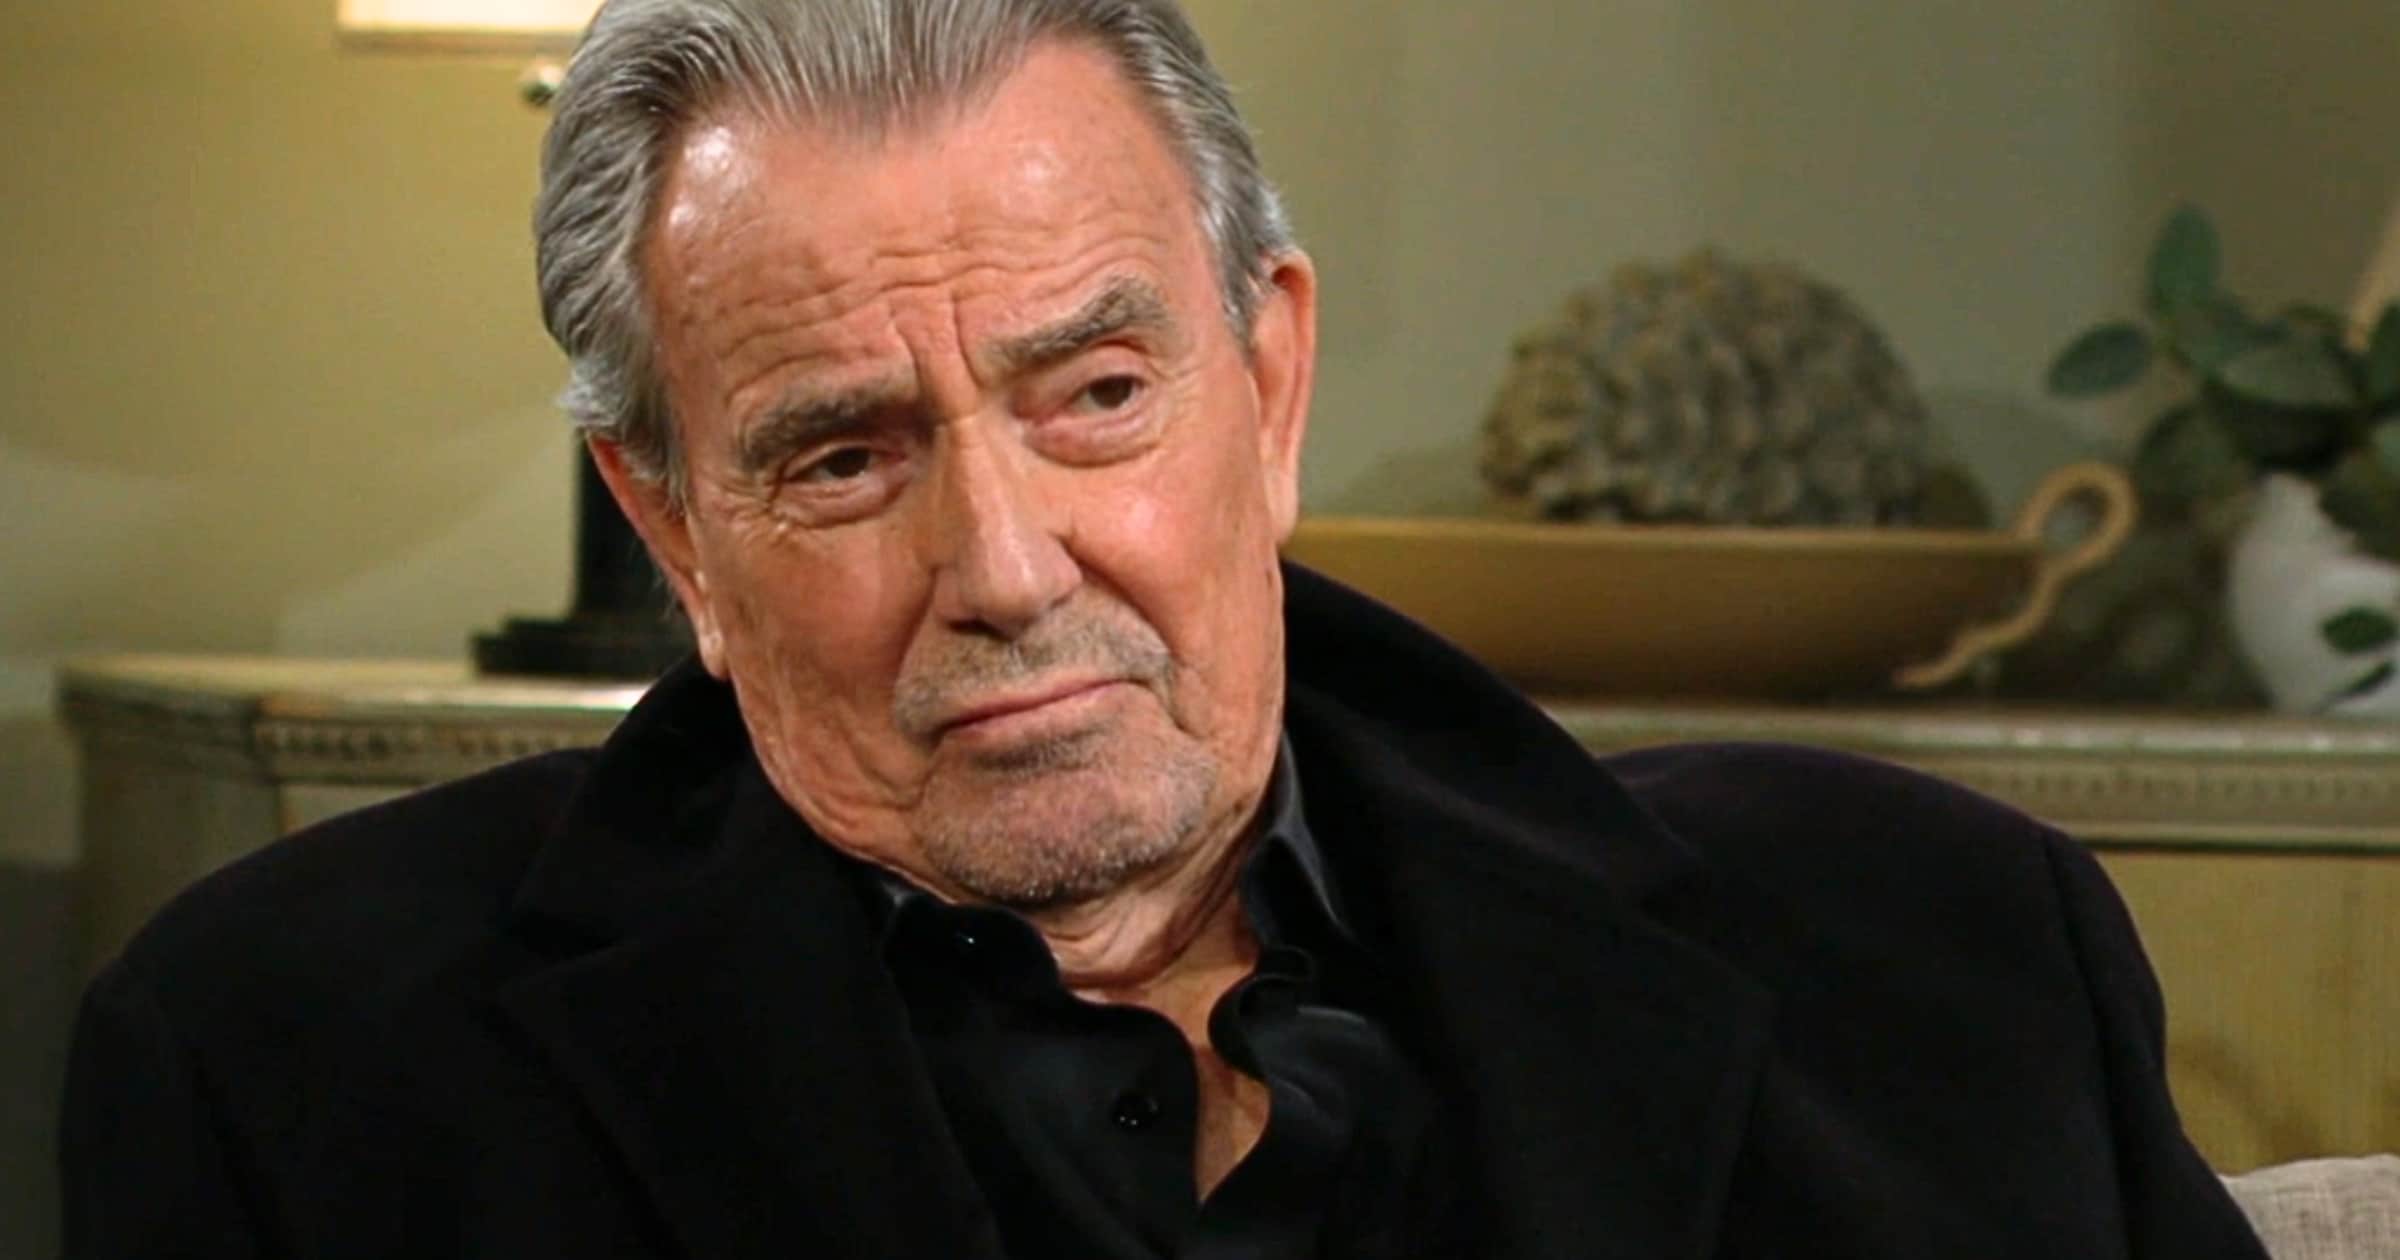 The Young and the Restless - Nov 27 - Victor